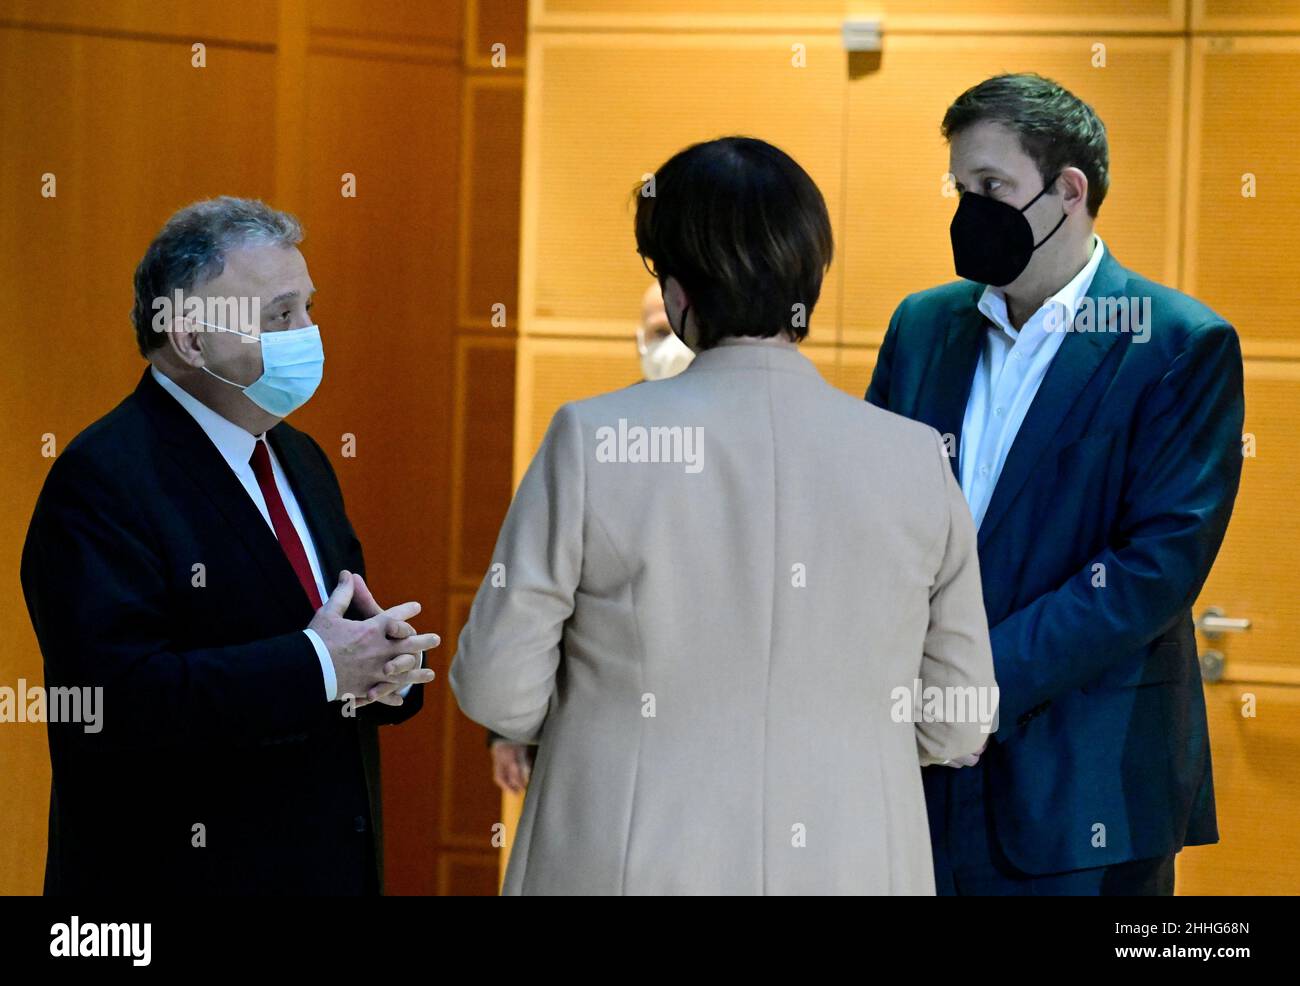 Israel's Ambassador to Germany Jeremy Issacharoff and co-leaders of Germany's Social Democratic Party (SPD) Saskia Esken and Lars Klingbeil gather at SPD's headquarters Willy-Brandt-Haus in Berlin, Germany January 24, 2022. Tobias Schwarz/Pool via REUTERS Stock Photo